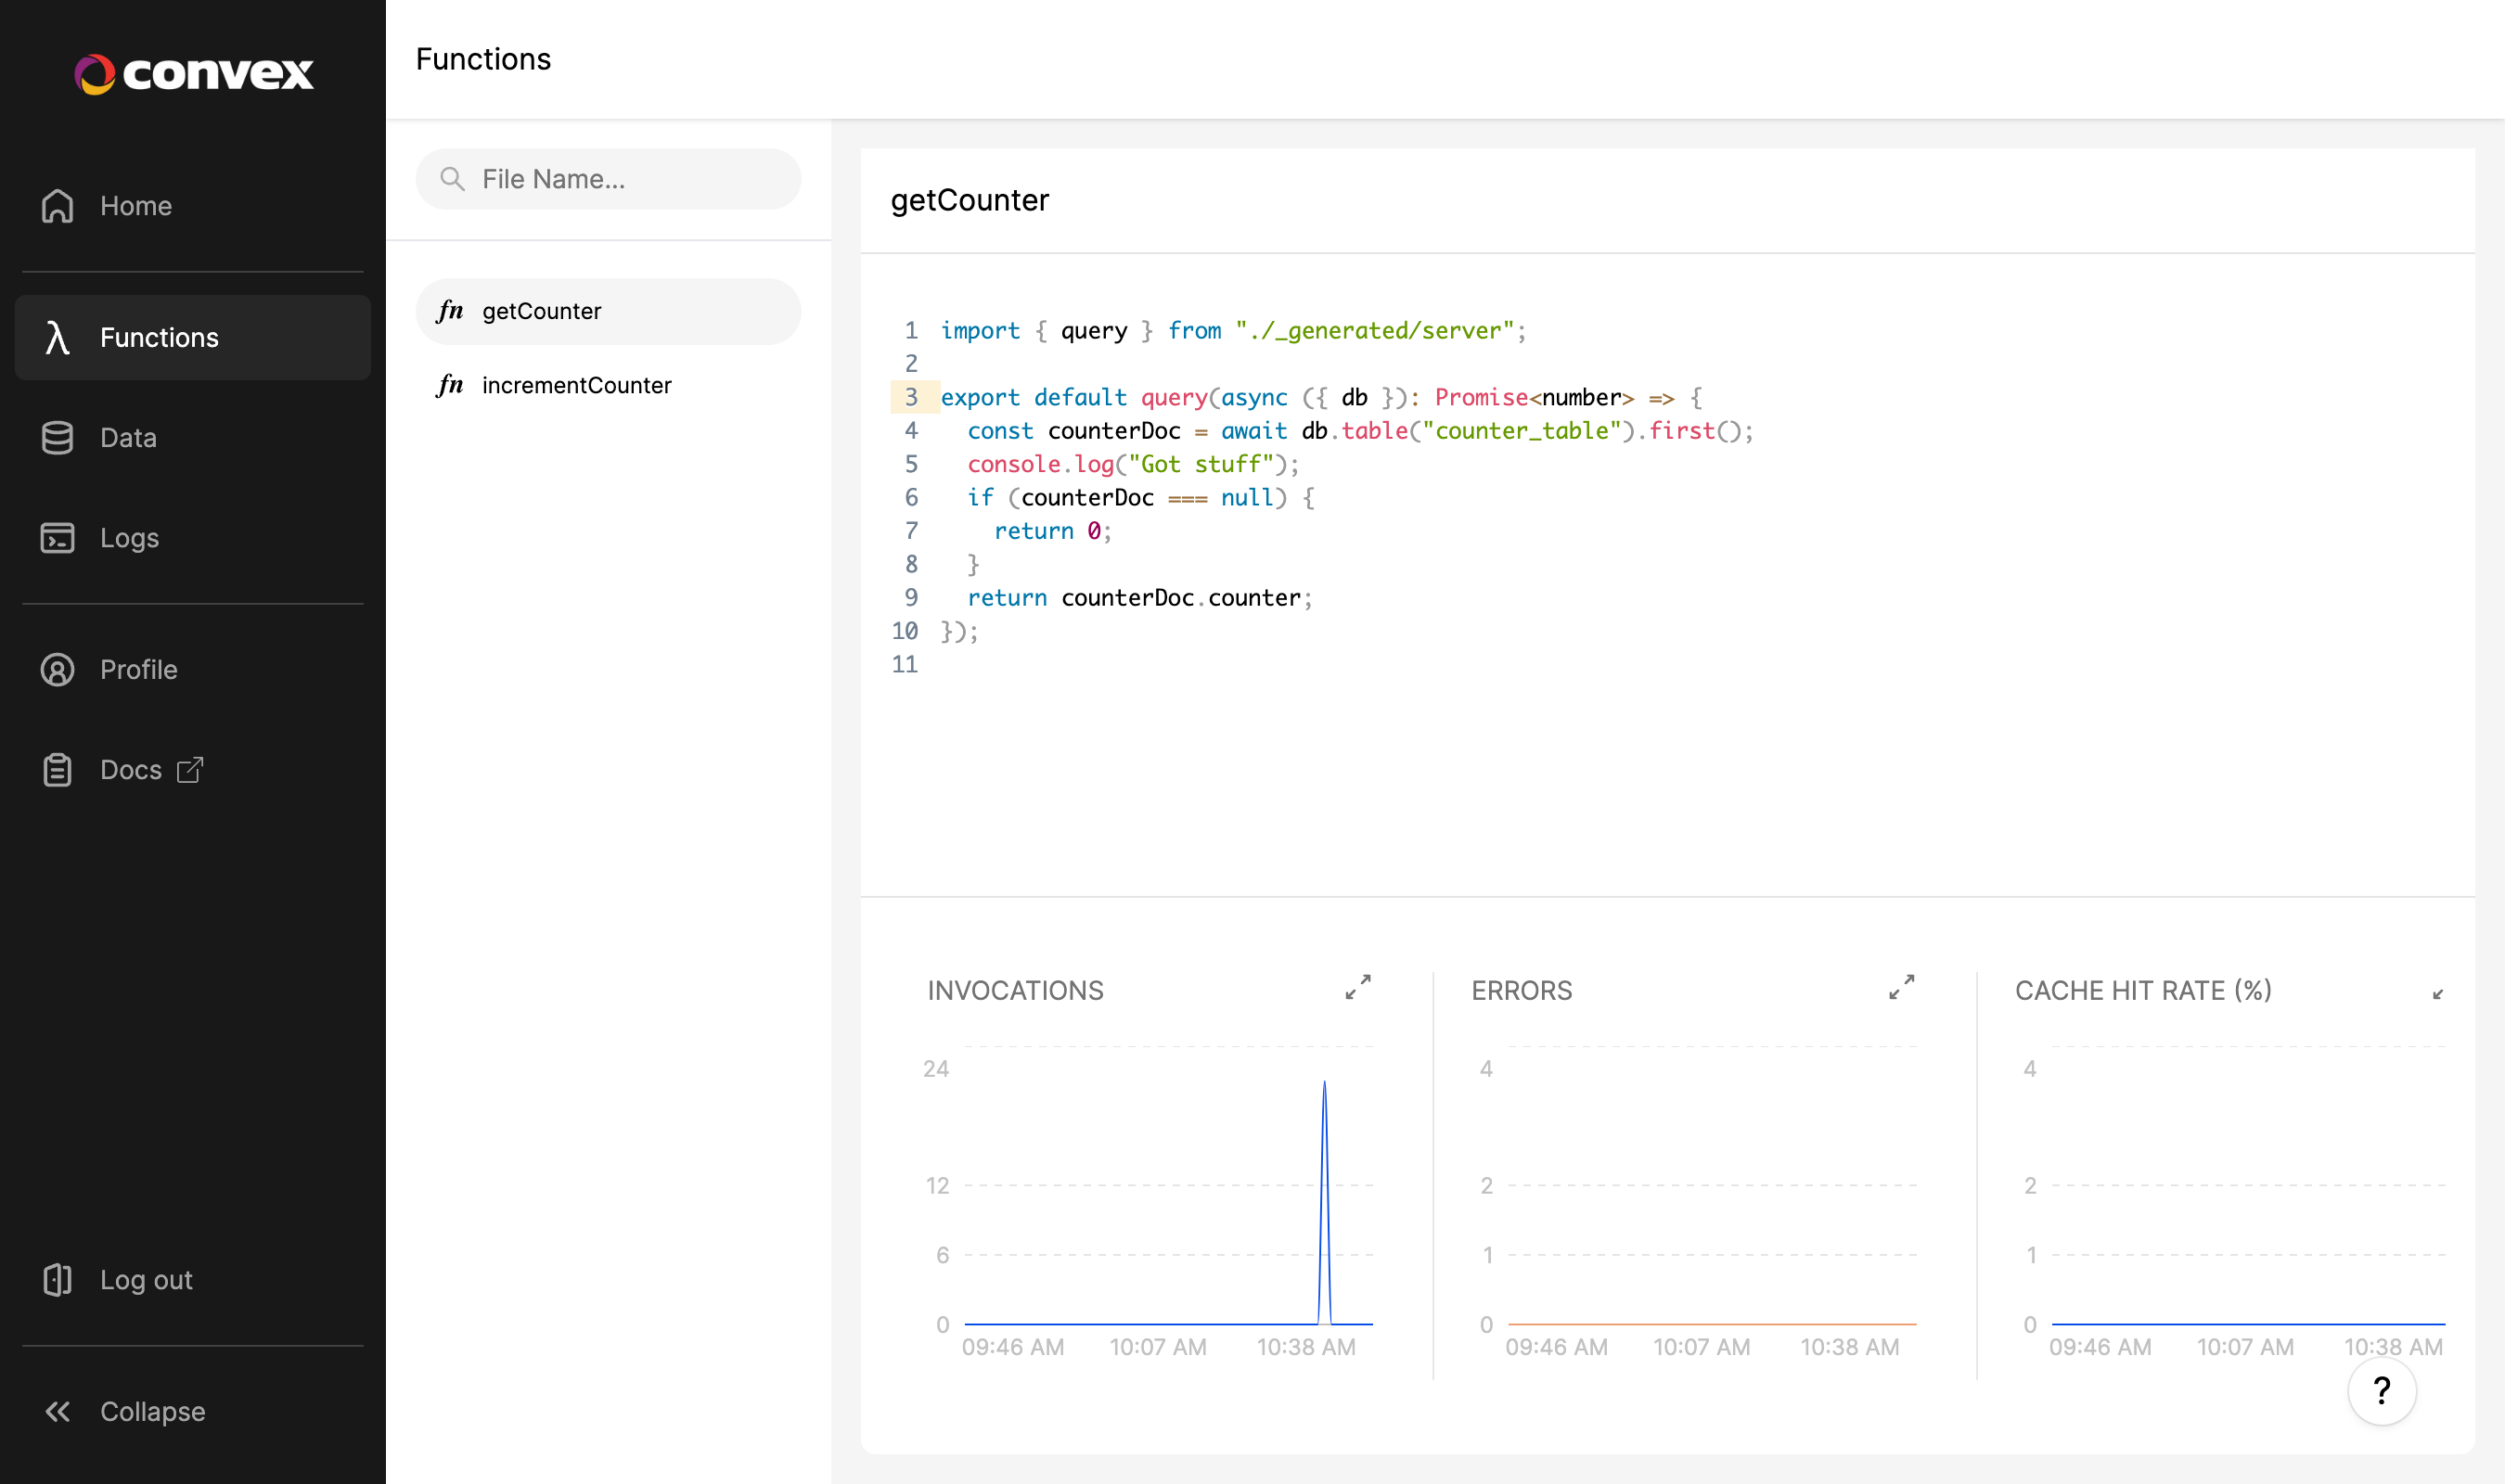 Functions Dashboard View